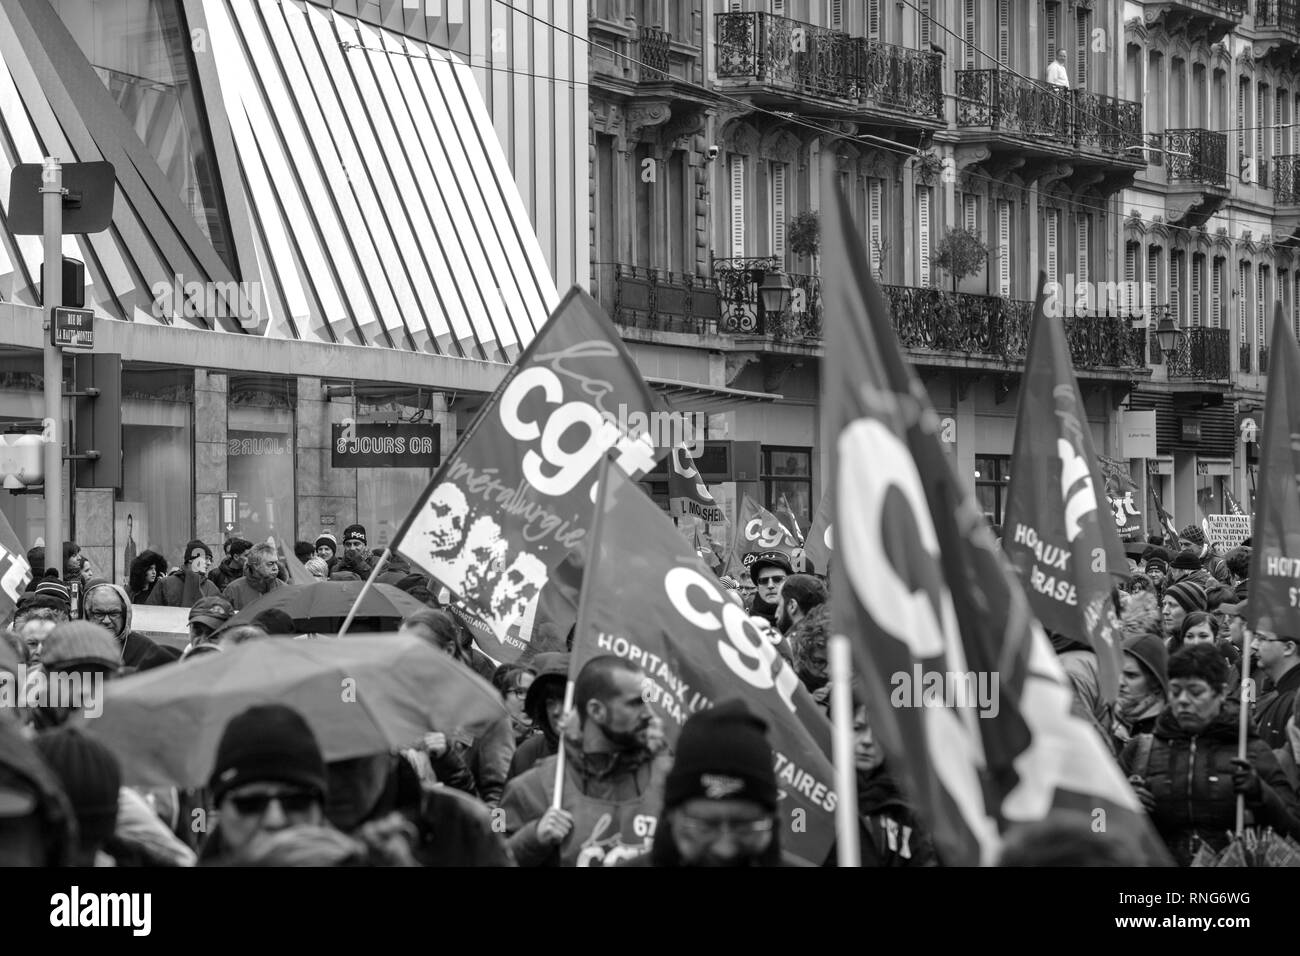 STRASBOURG, FRANCE - MAR 22, 2018: CGT General Confederation of Labour workers with placard at demonstration protest against Macron French government string of reforms - closed central street people with flags Stock Photo